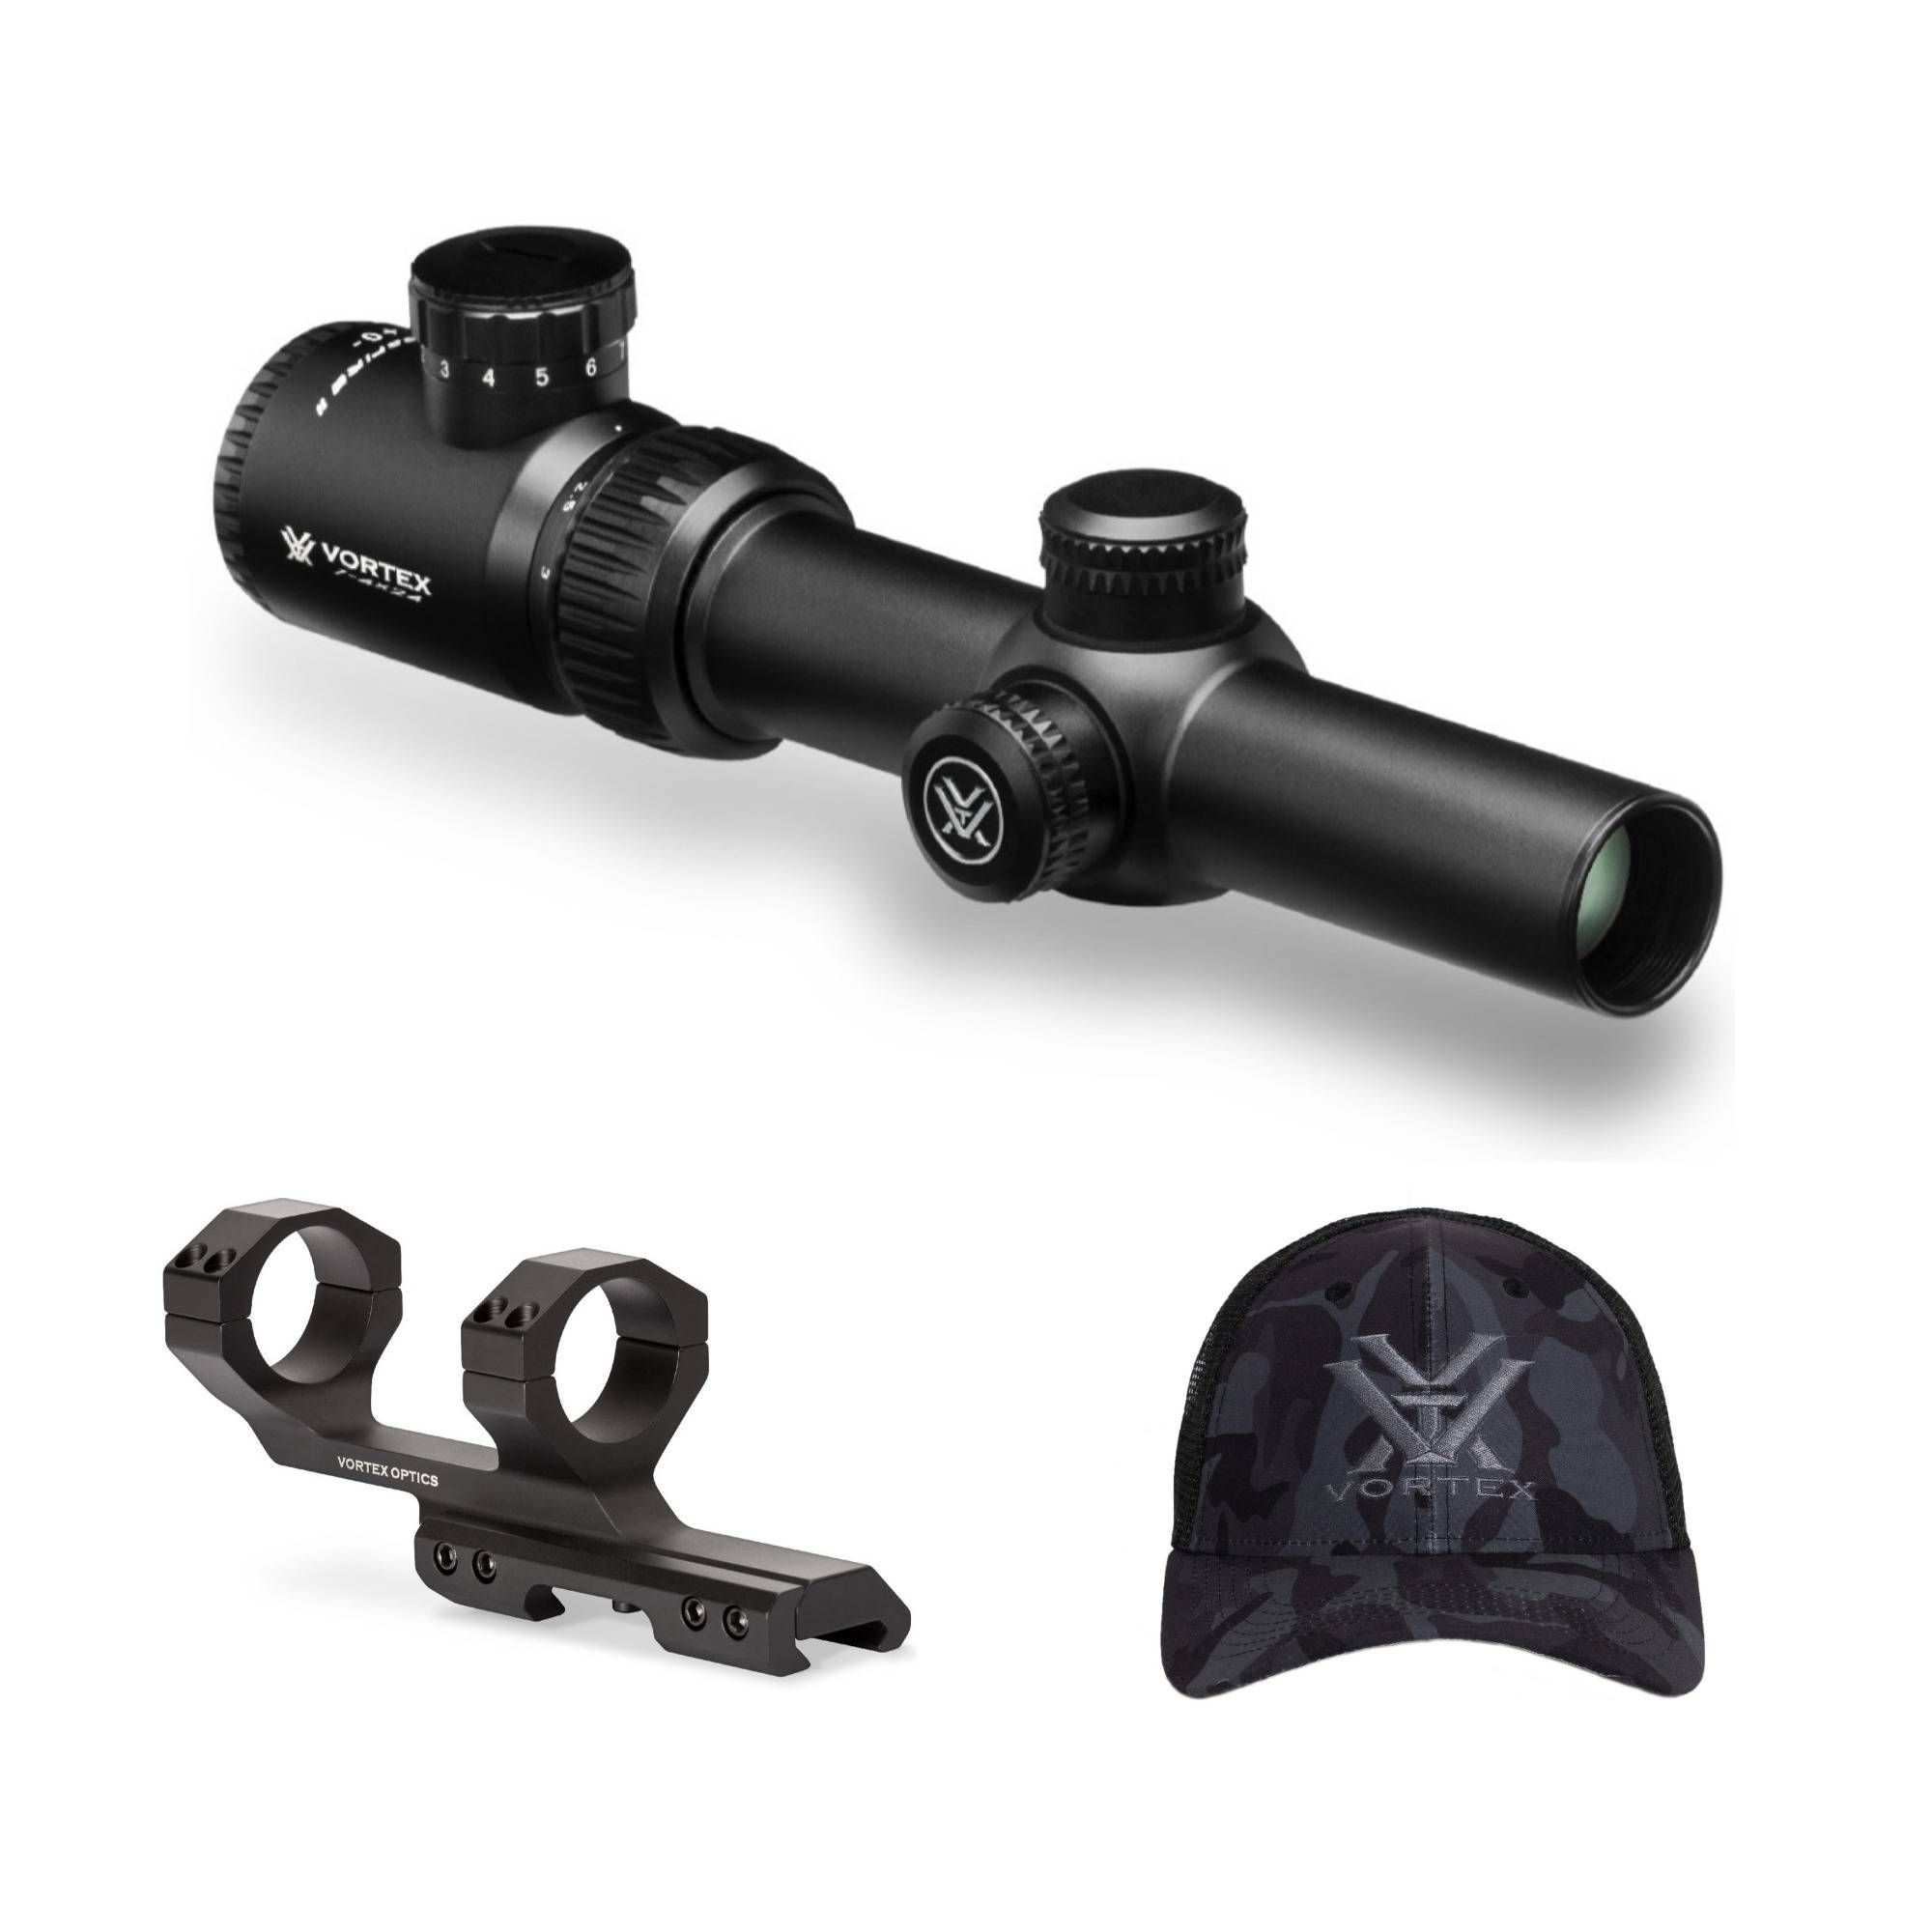 Vortex Crossfire II 1-4x24 Riflescope (V-Brite MOA Reticle) With 30mm Riflescope Mount and Hat